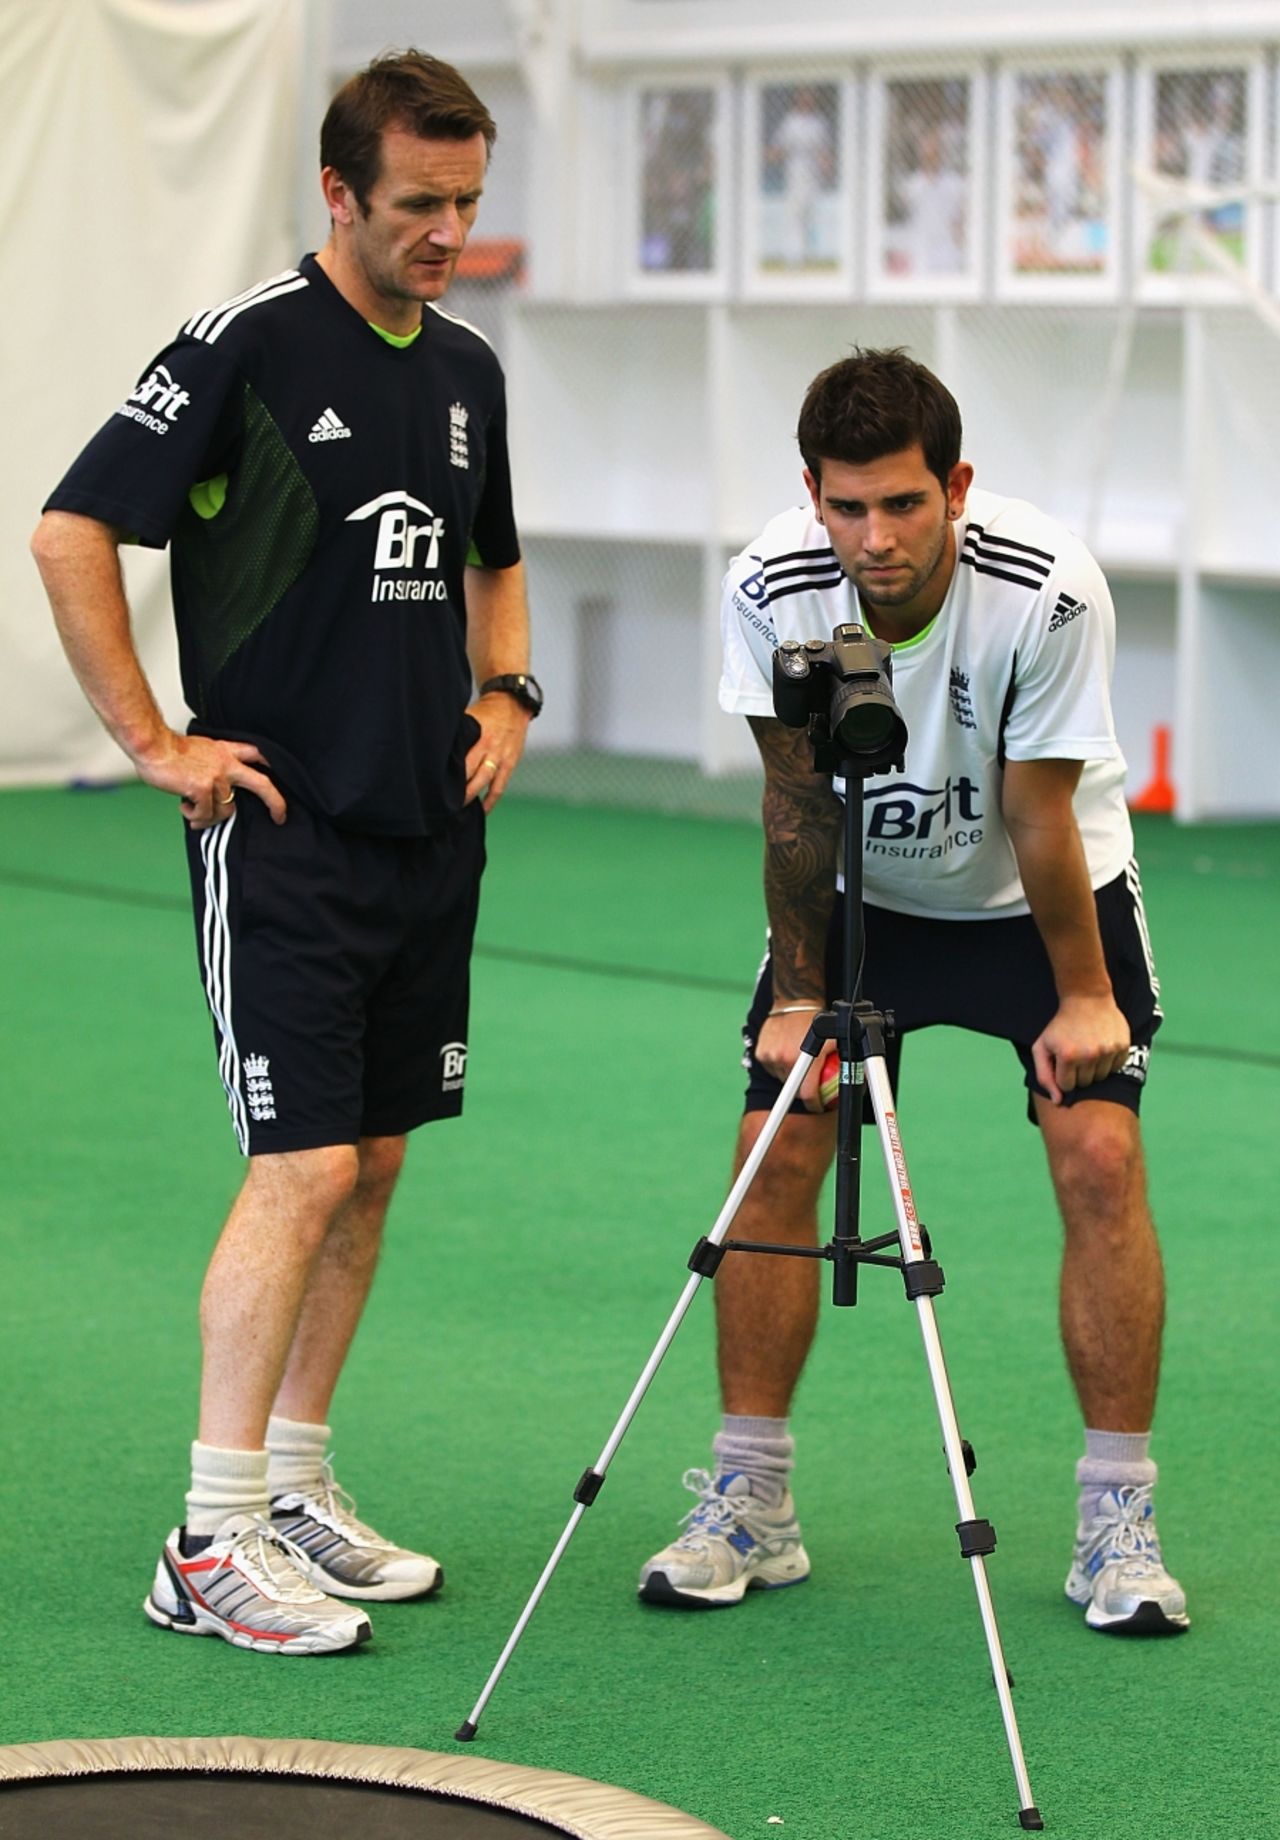 Jade Dernbach and bowling coach Kevin Shine review a video of Dernbach's bowling during an England Performance Programme training session, Loughborough, November 5 2010